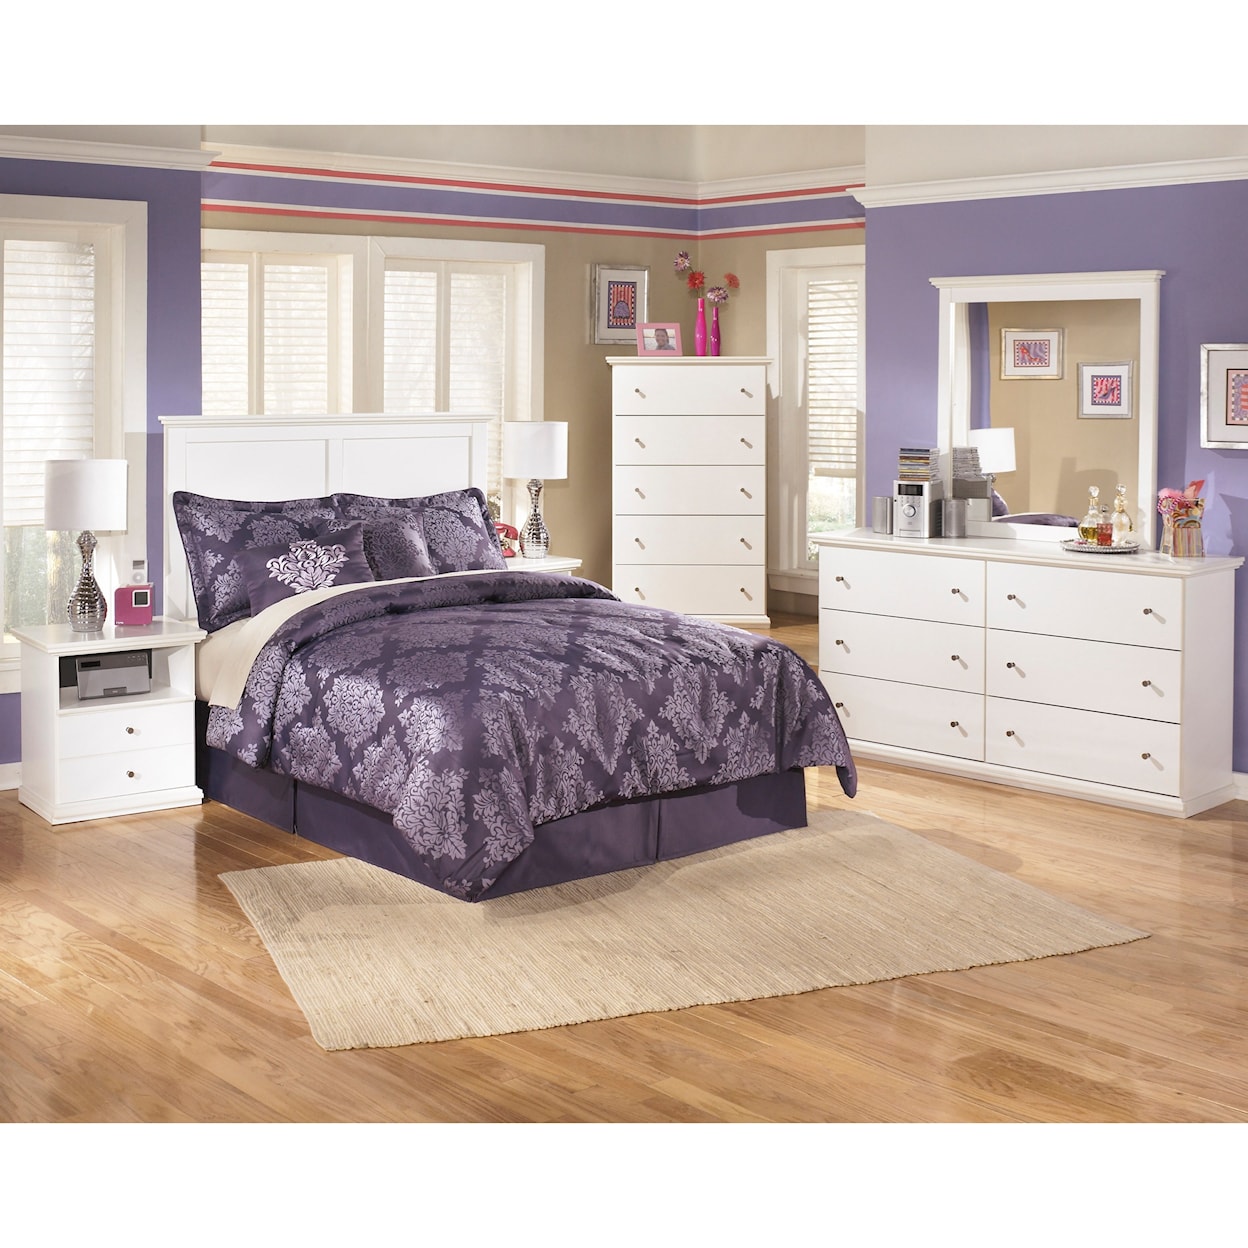 Signature Design by Ashley Bostwick Shoals Full Bedroom Group